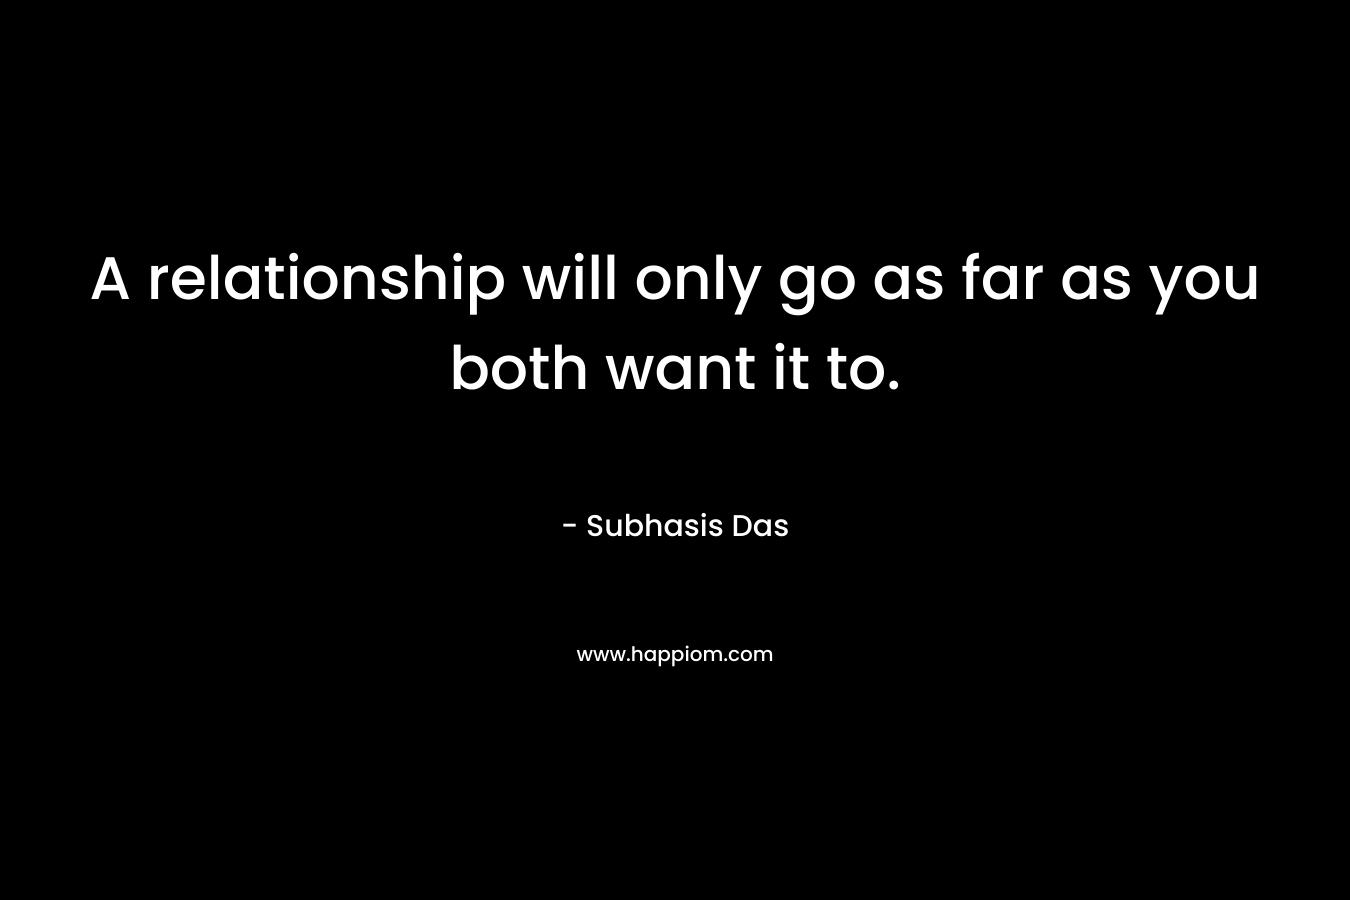 A relationship will only go as far as you both want it to. – Subhasis Das